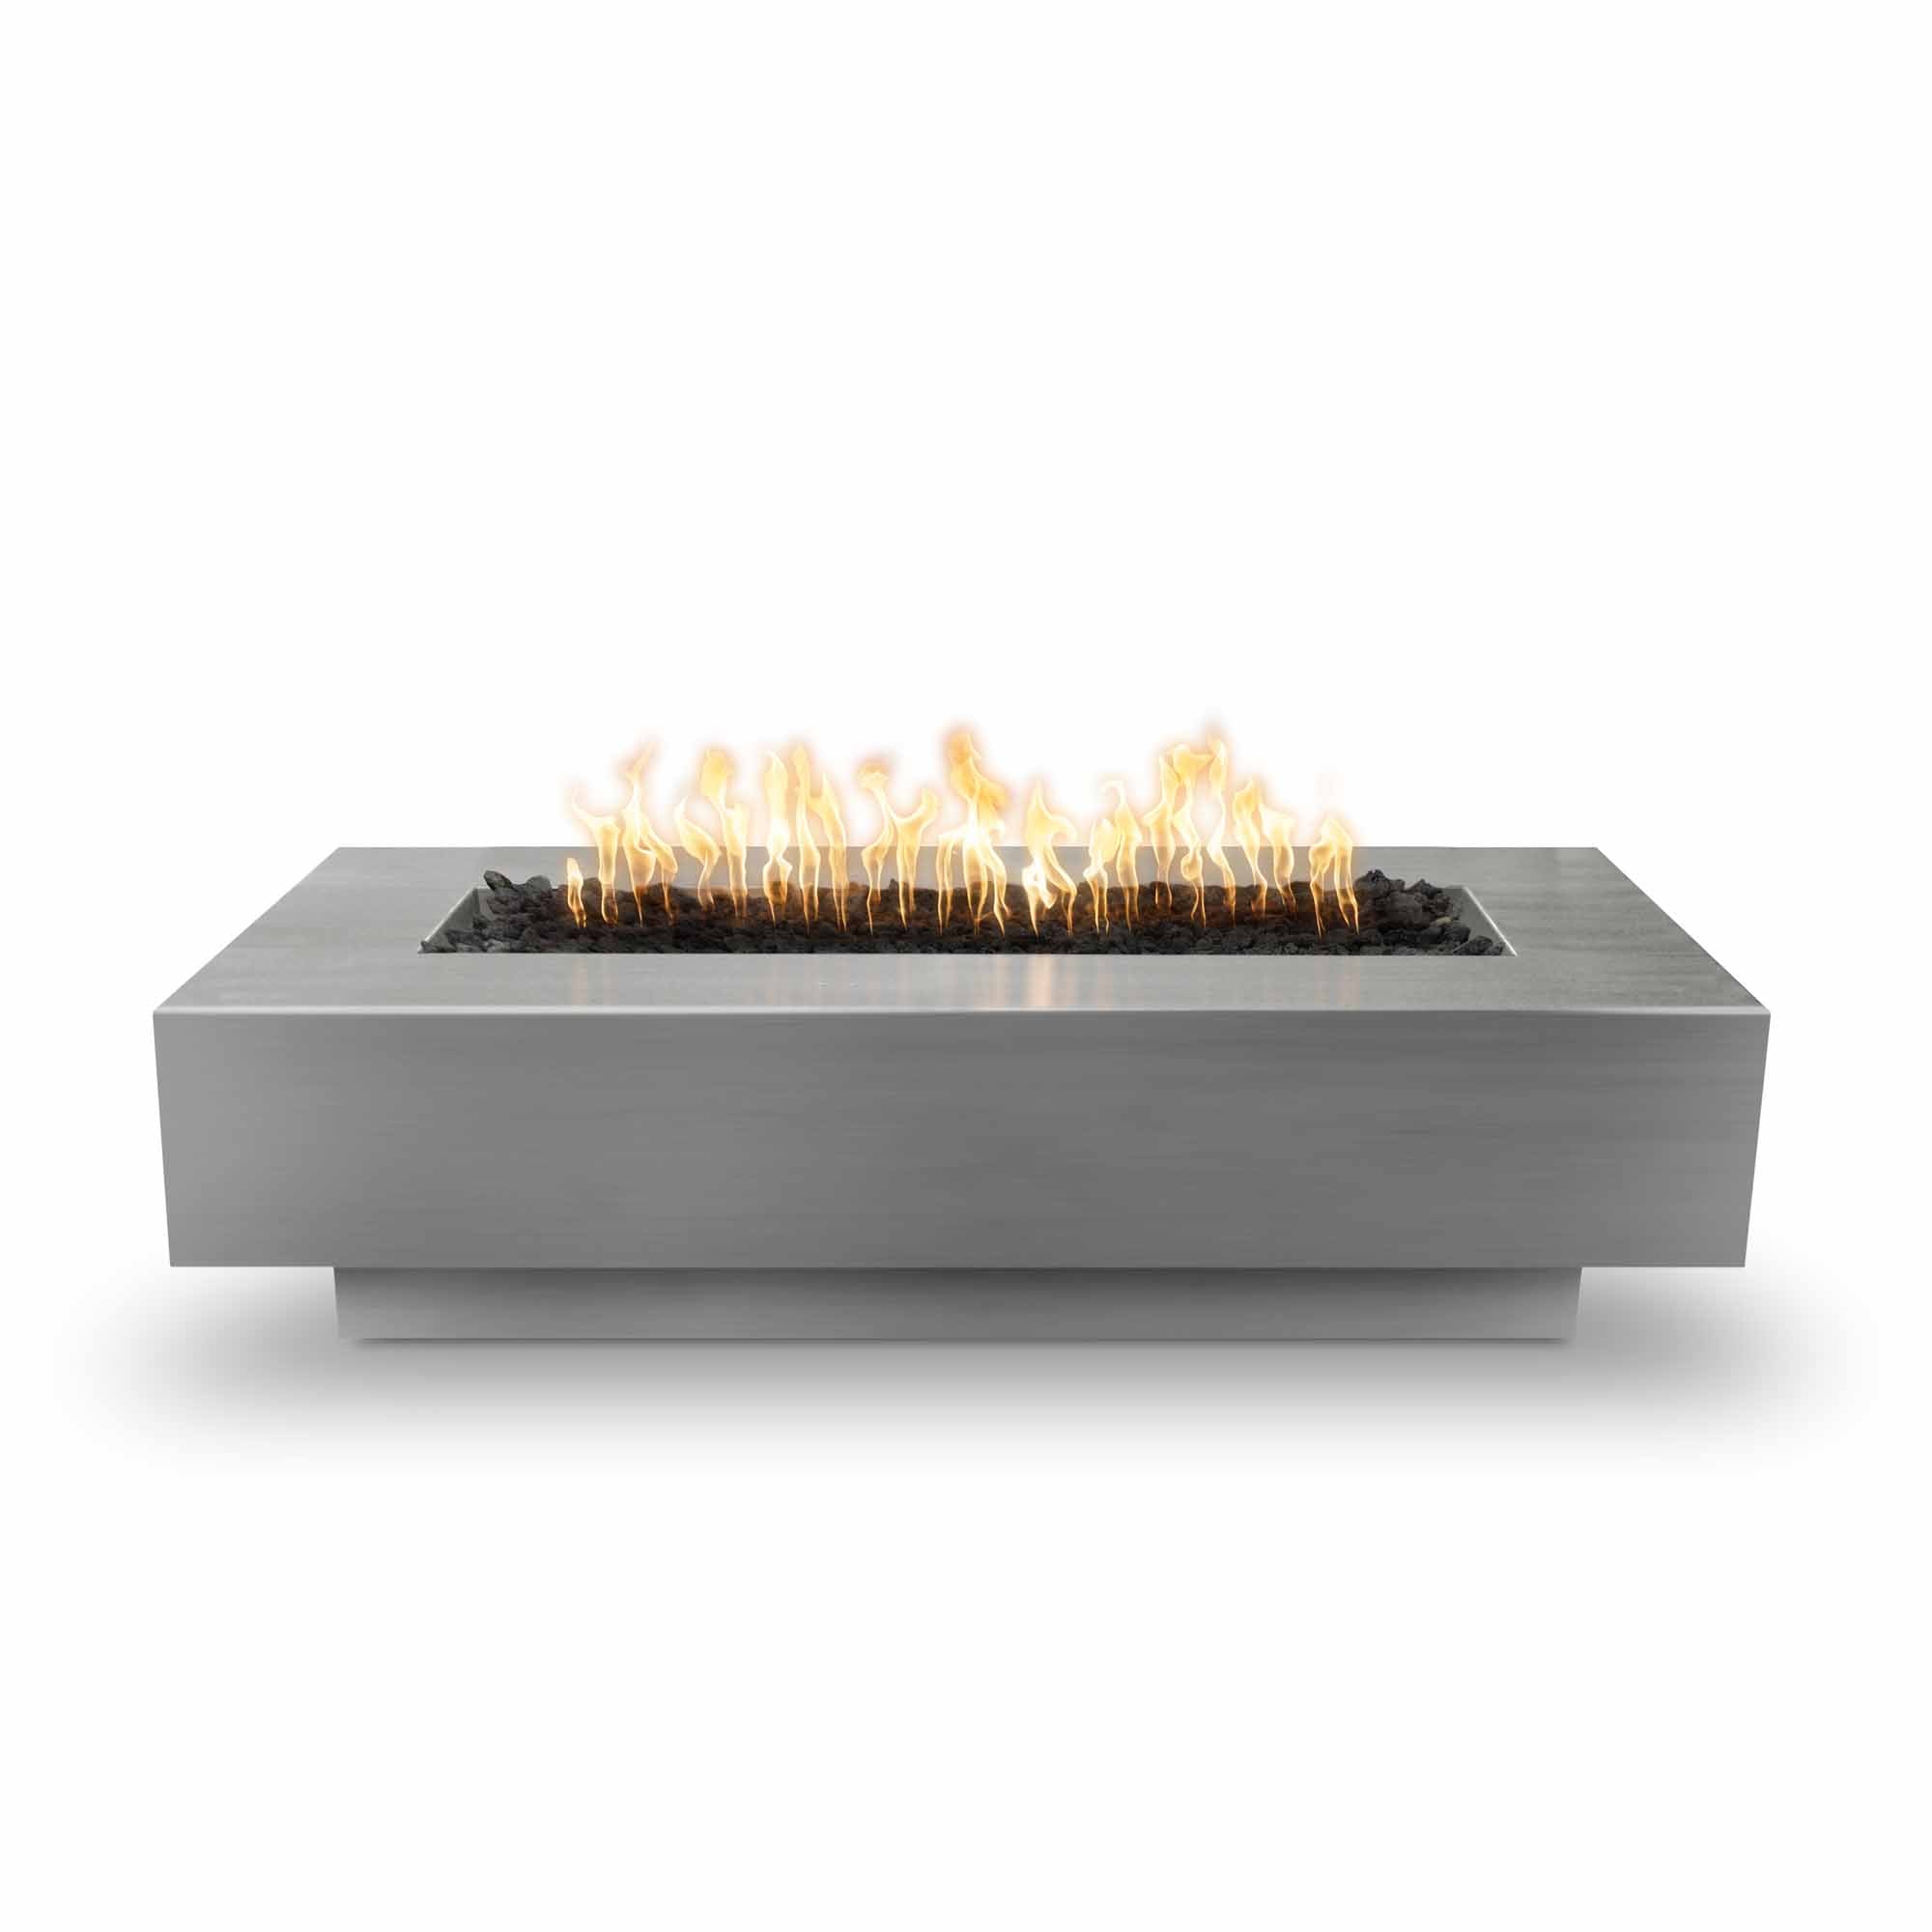 The Outdoor Plus Coronado Fire Pit Stainless Steel OPT-CORSSXX - Serenity Provision